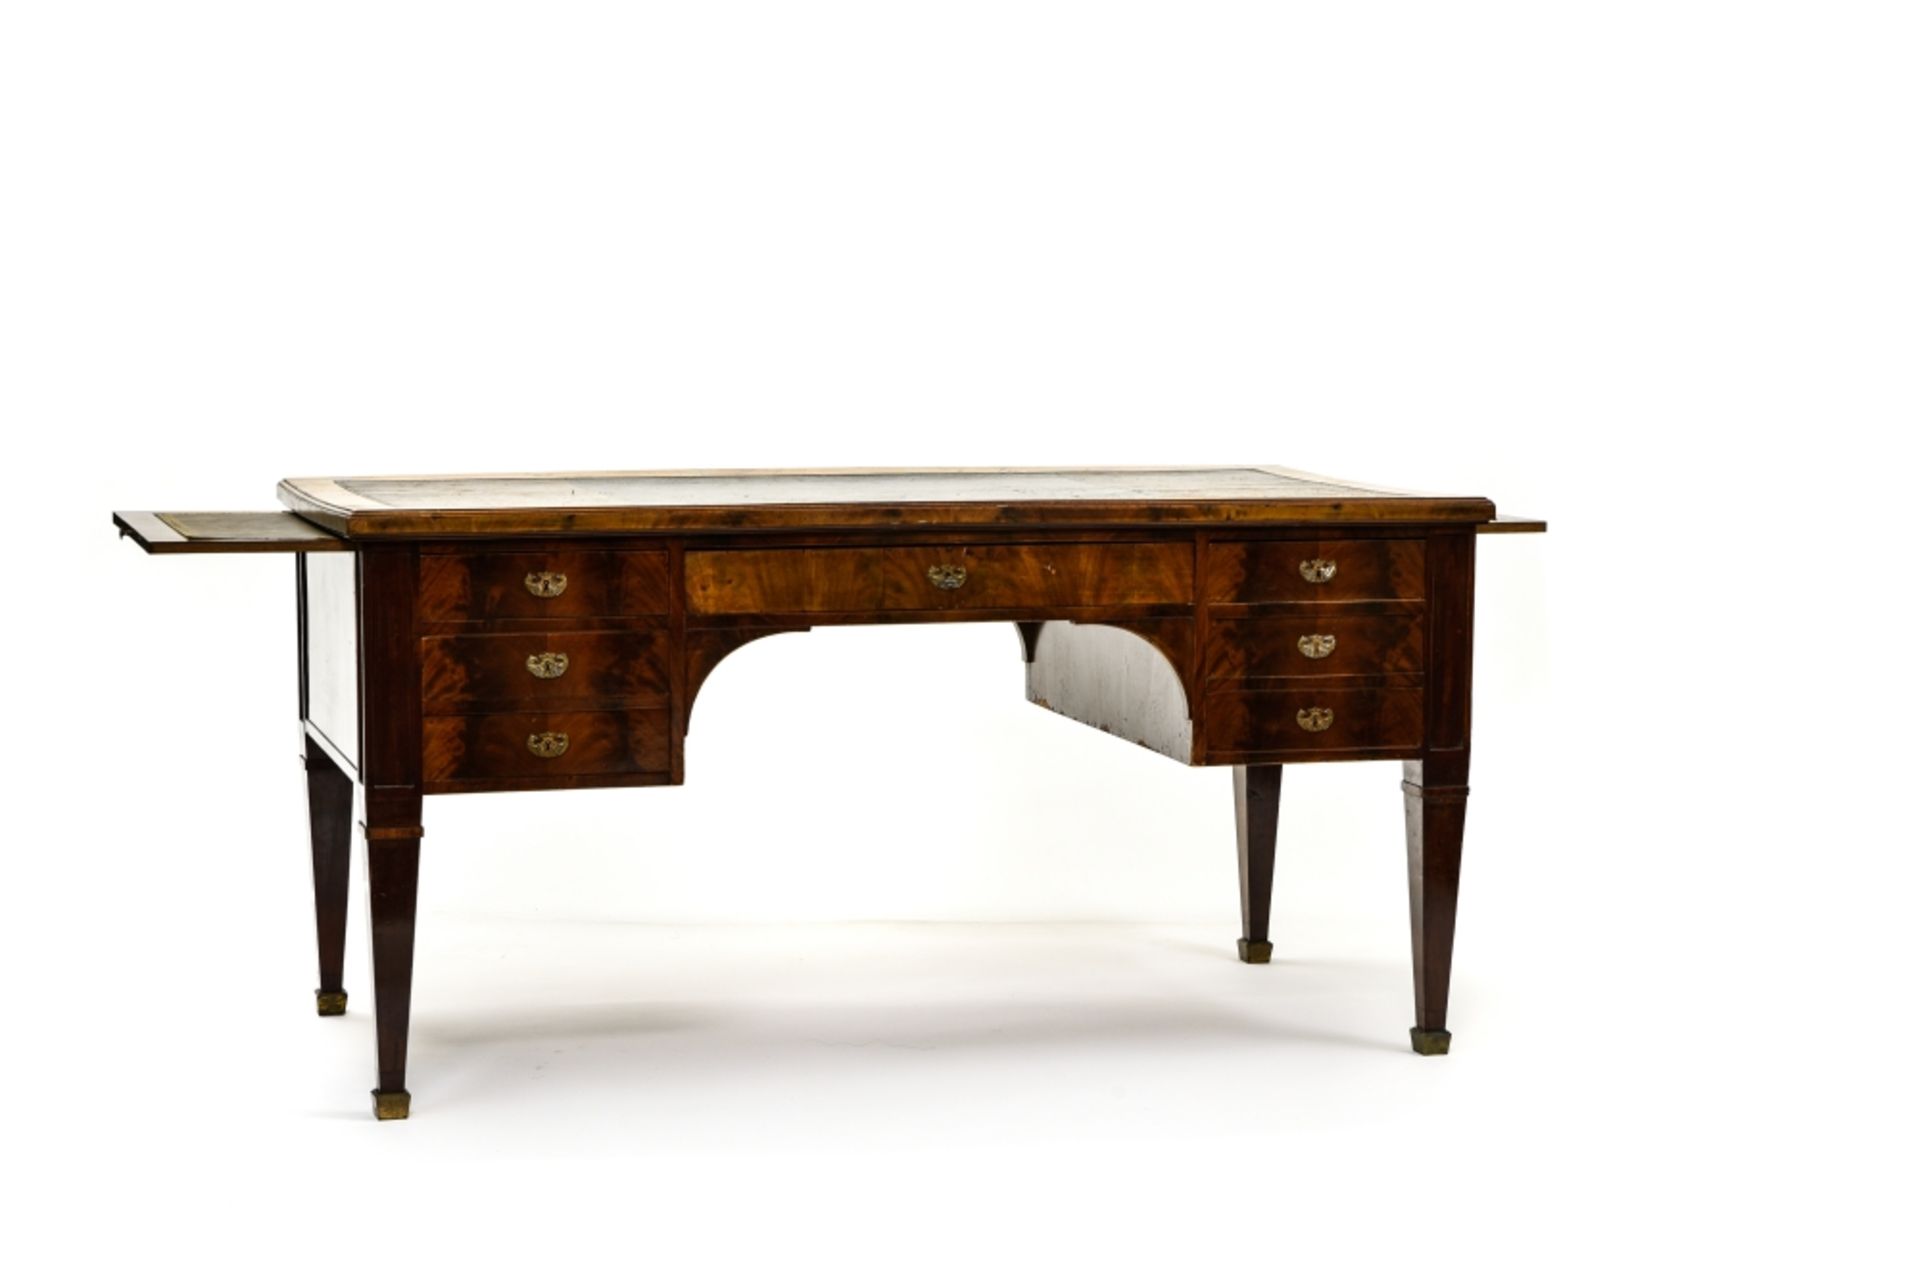 Large empire desk 19TH CENTURY WORK mahogany, with six drawers (one hidden) and brown and gilt - Image 2 of 2